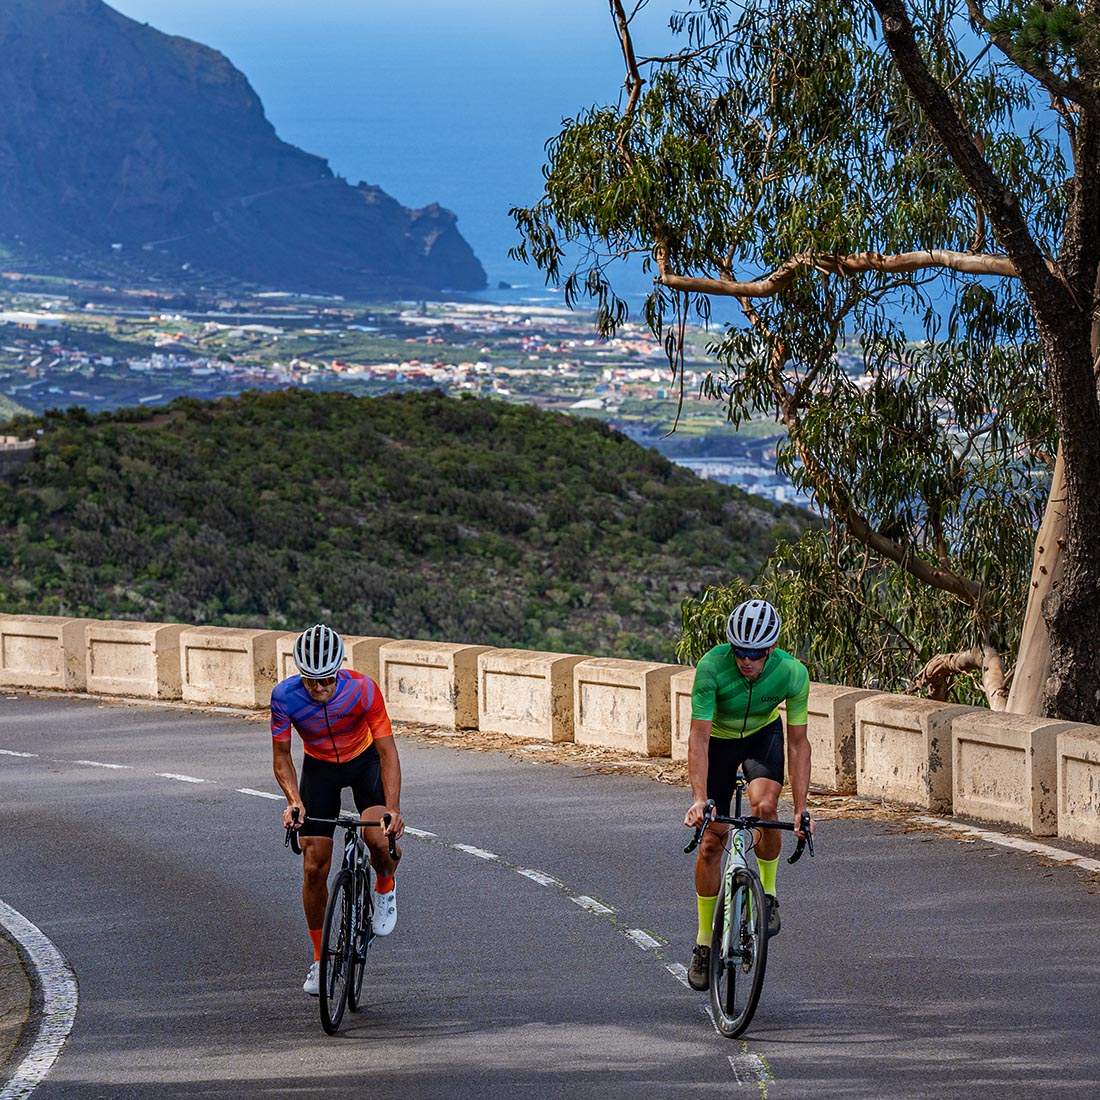 Cycling on Tenerife and wearing new Luxa jerseys